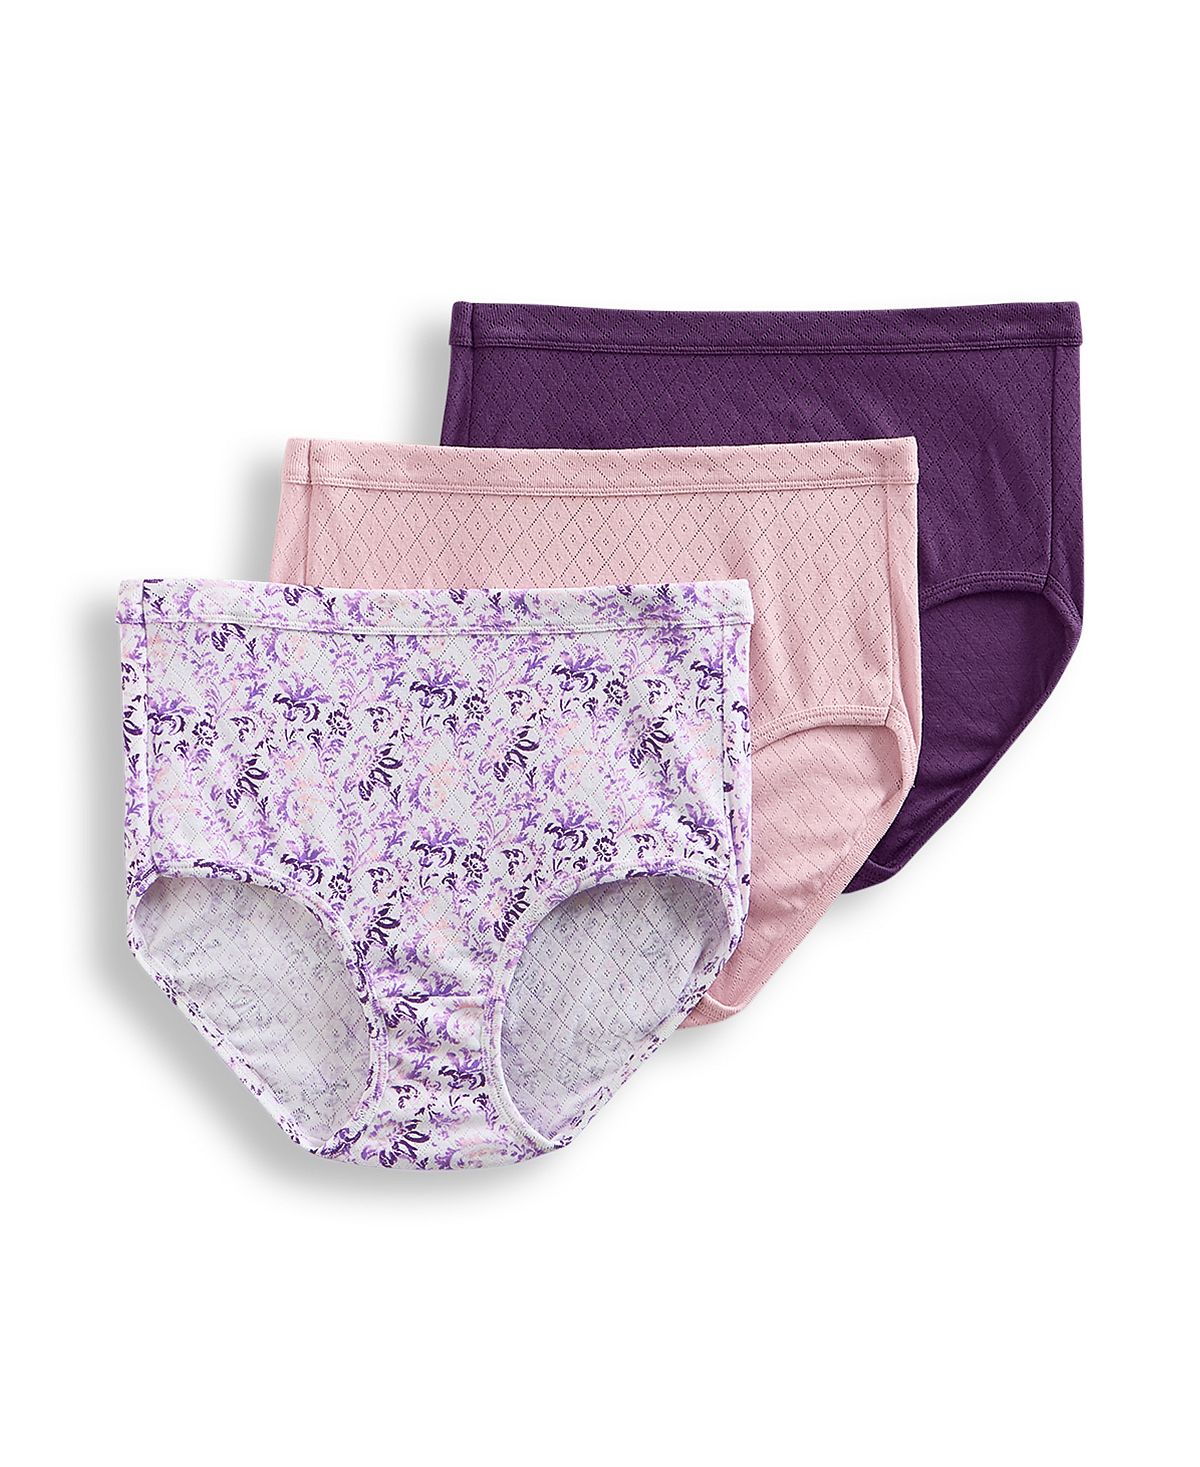 http://www.cheapundies.com/cdn/shop/products/Jockey-Elance-Breathe-Hipster-Underwear-3-Pack-1540-Also-Available-In-Extended-Sizes-Faded-Mauve-faded-Filigree-juicy-Grape_123760.jpg?v=1683799030